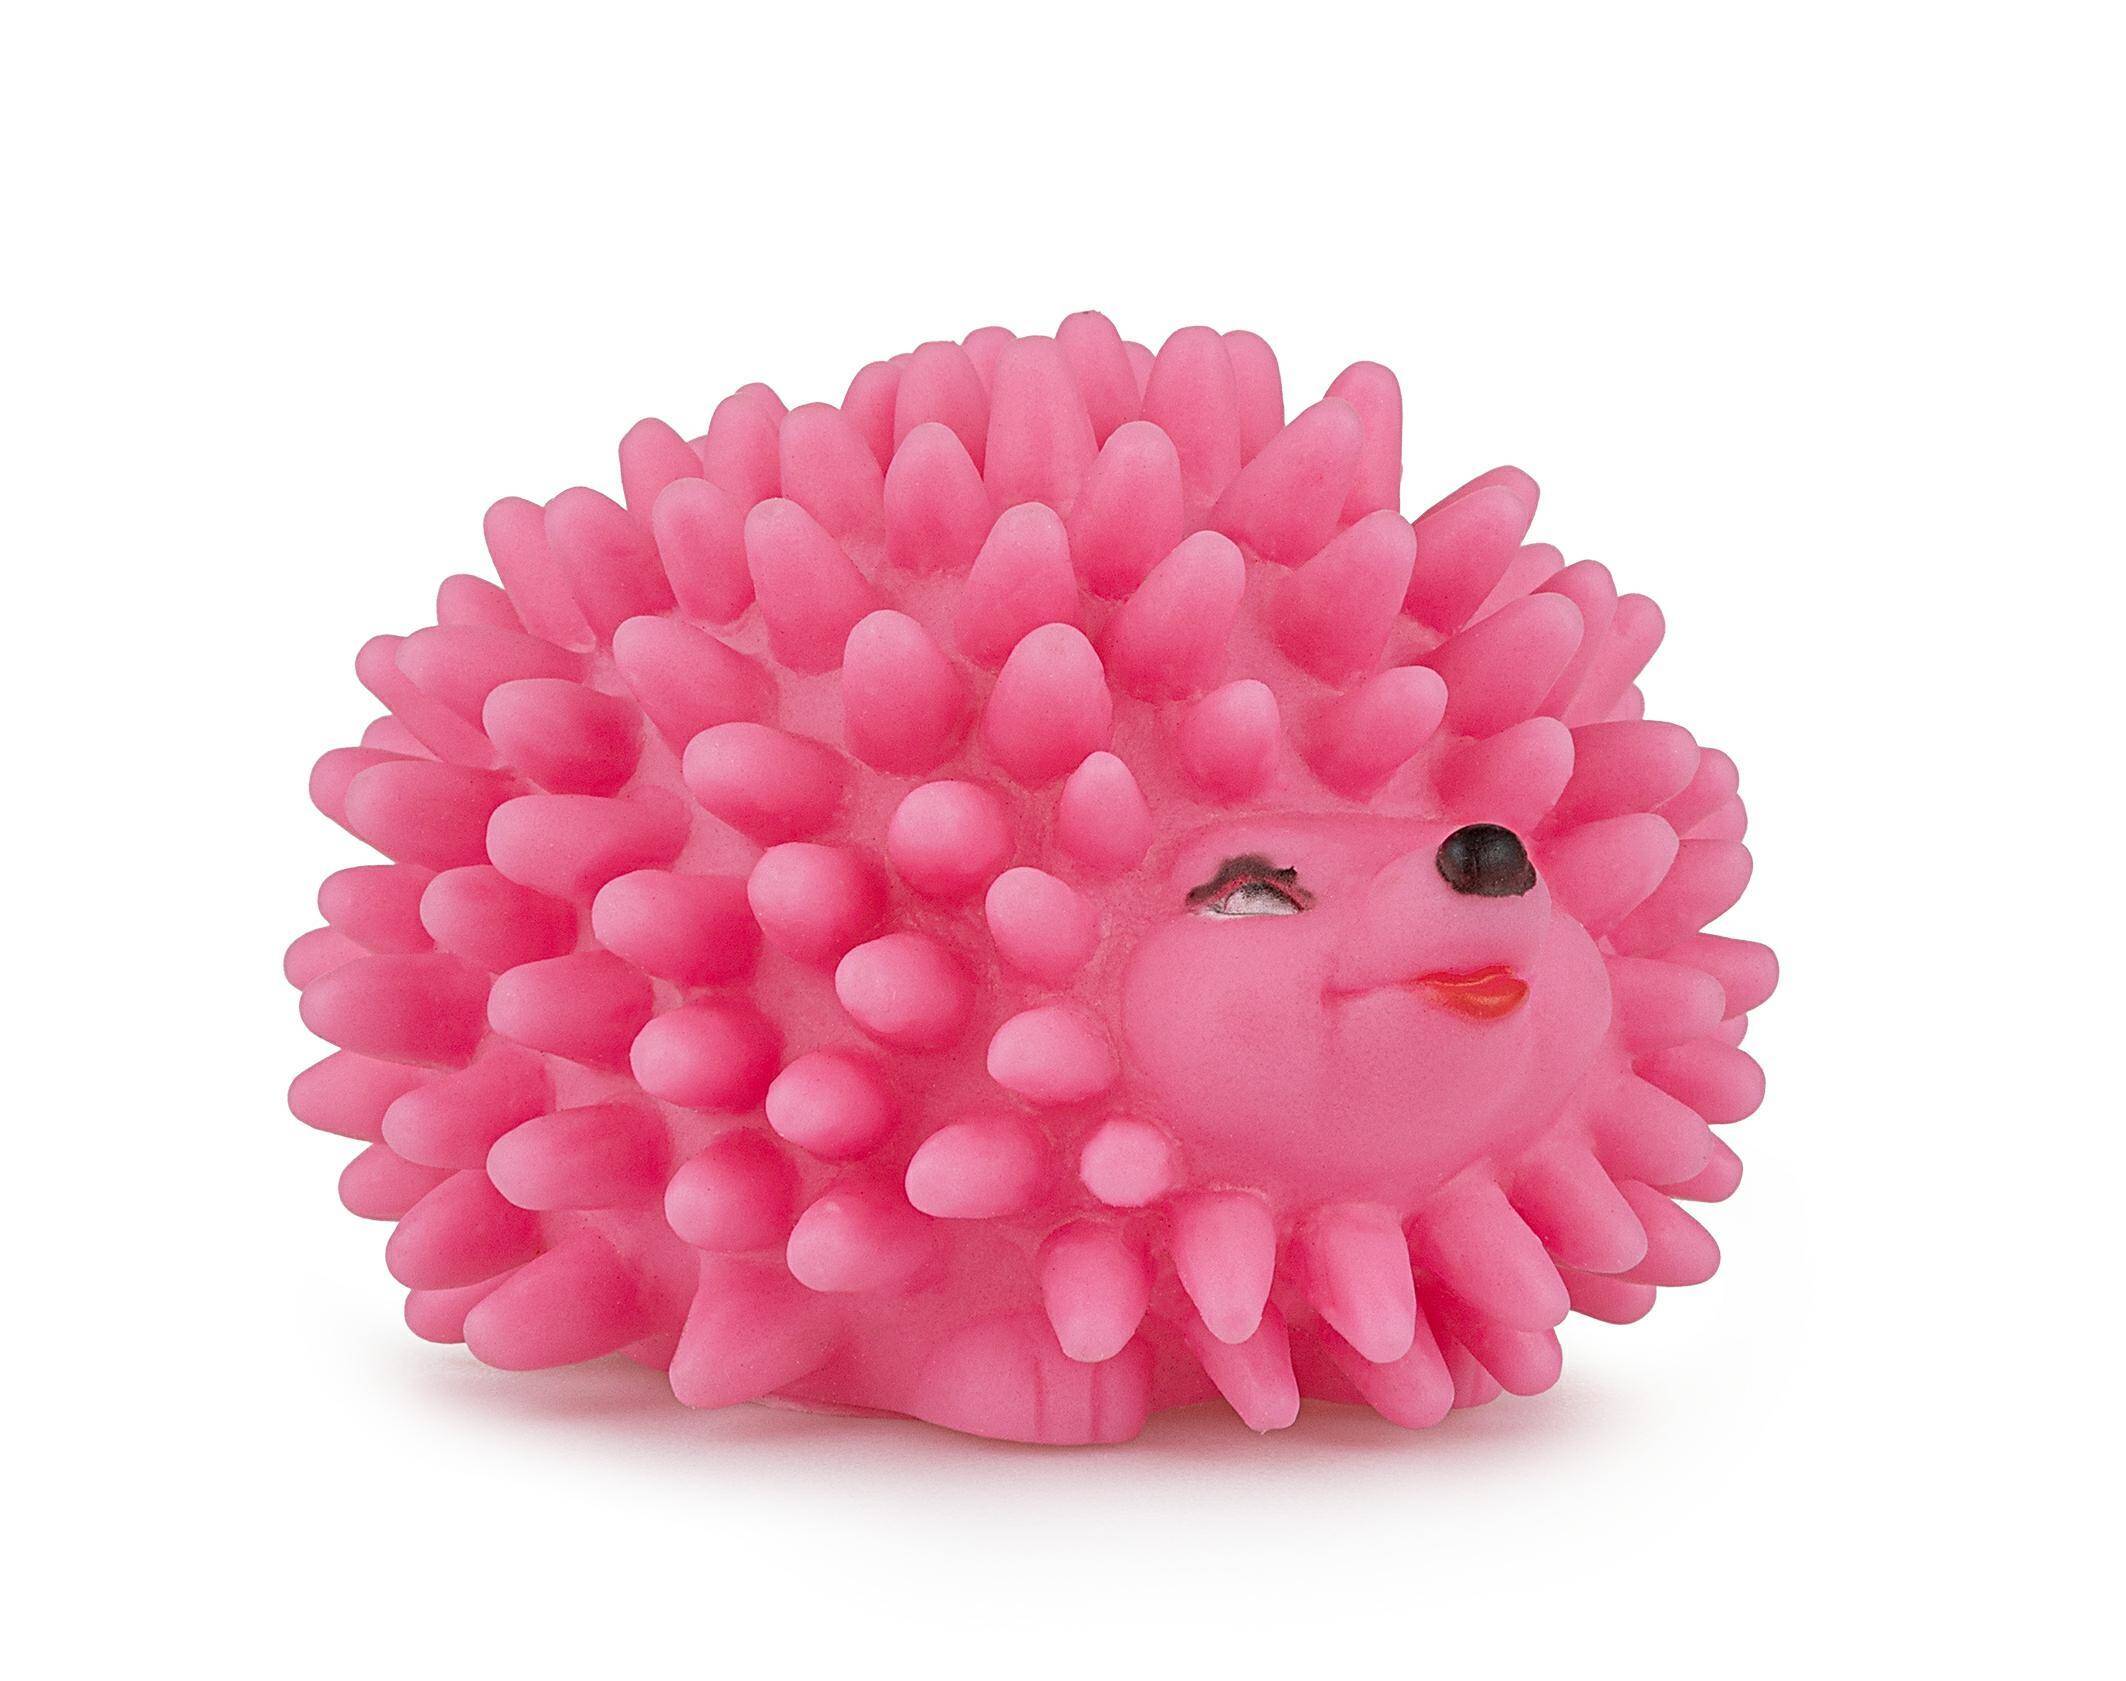 Z818 Squeaky toy with spikes